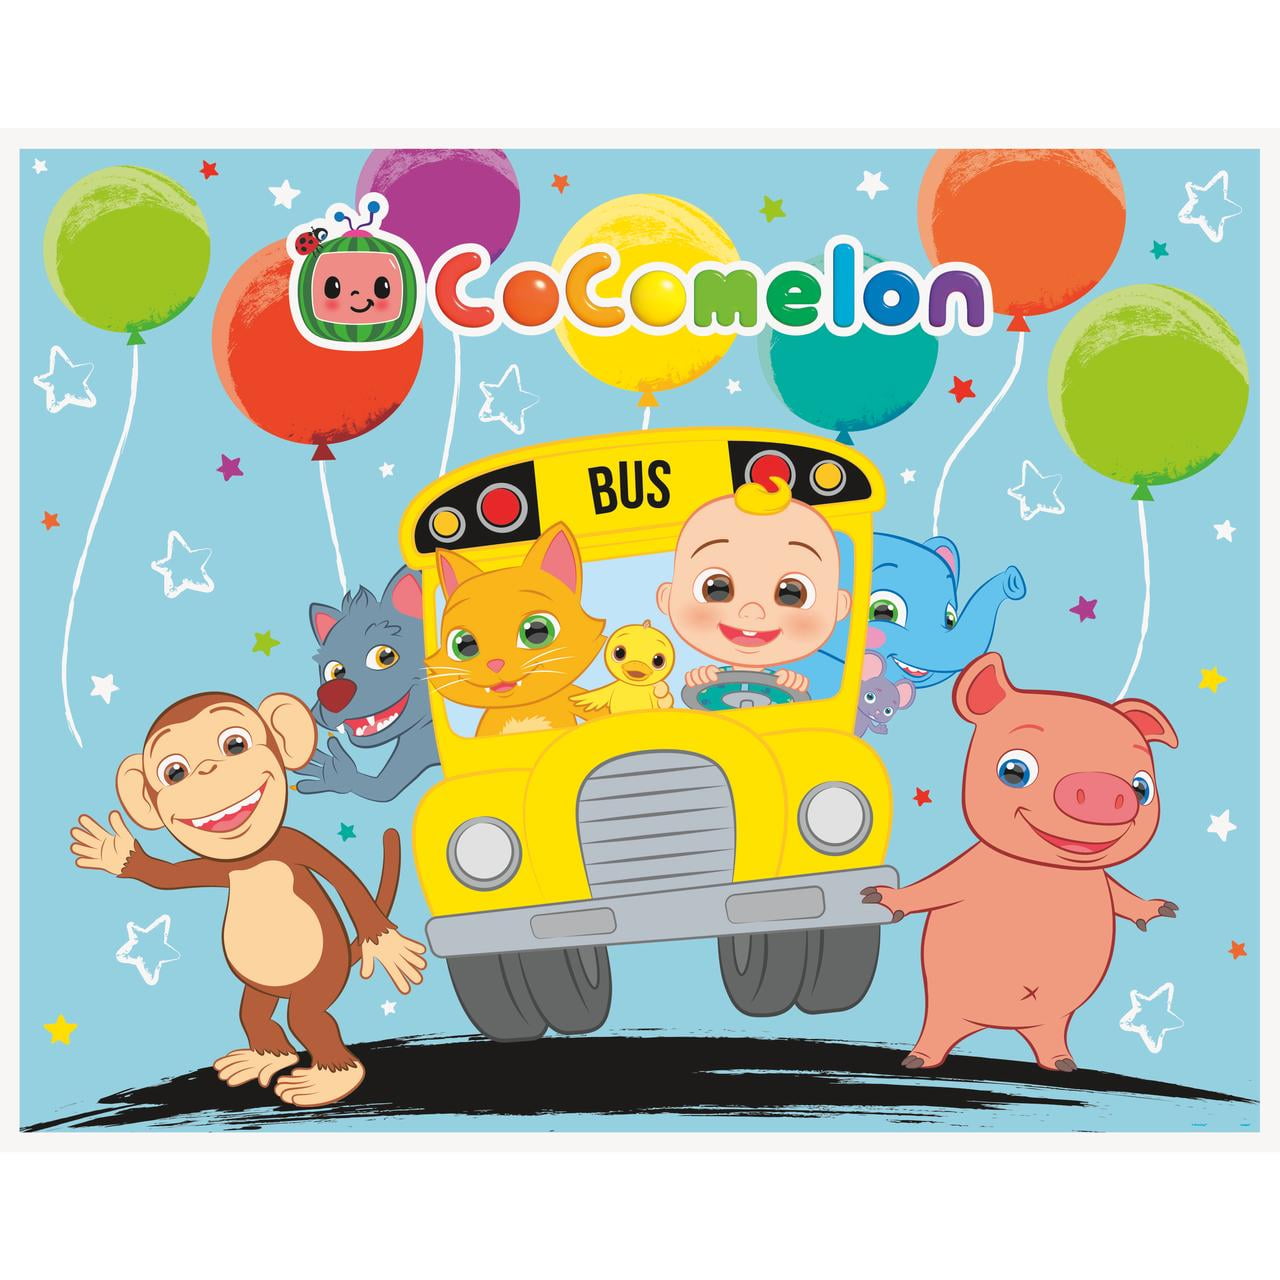 Cocomelon Photo Booth Backdrop, 5ft x 4ft